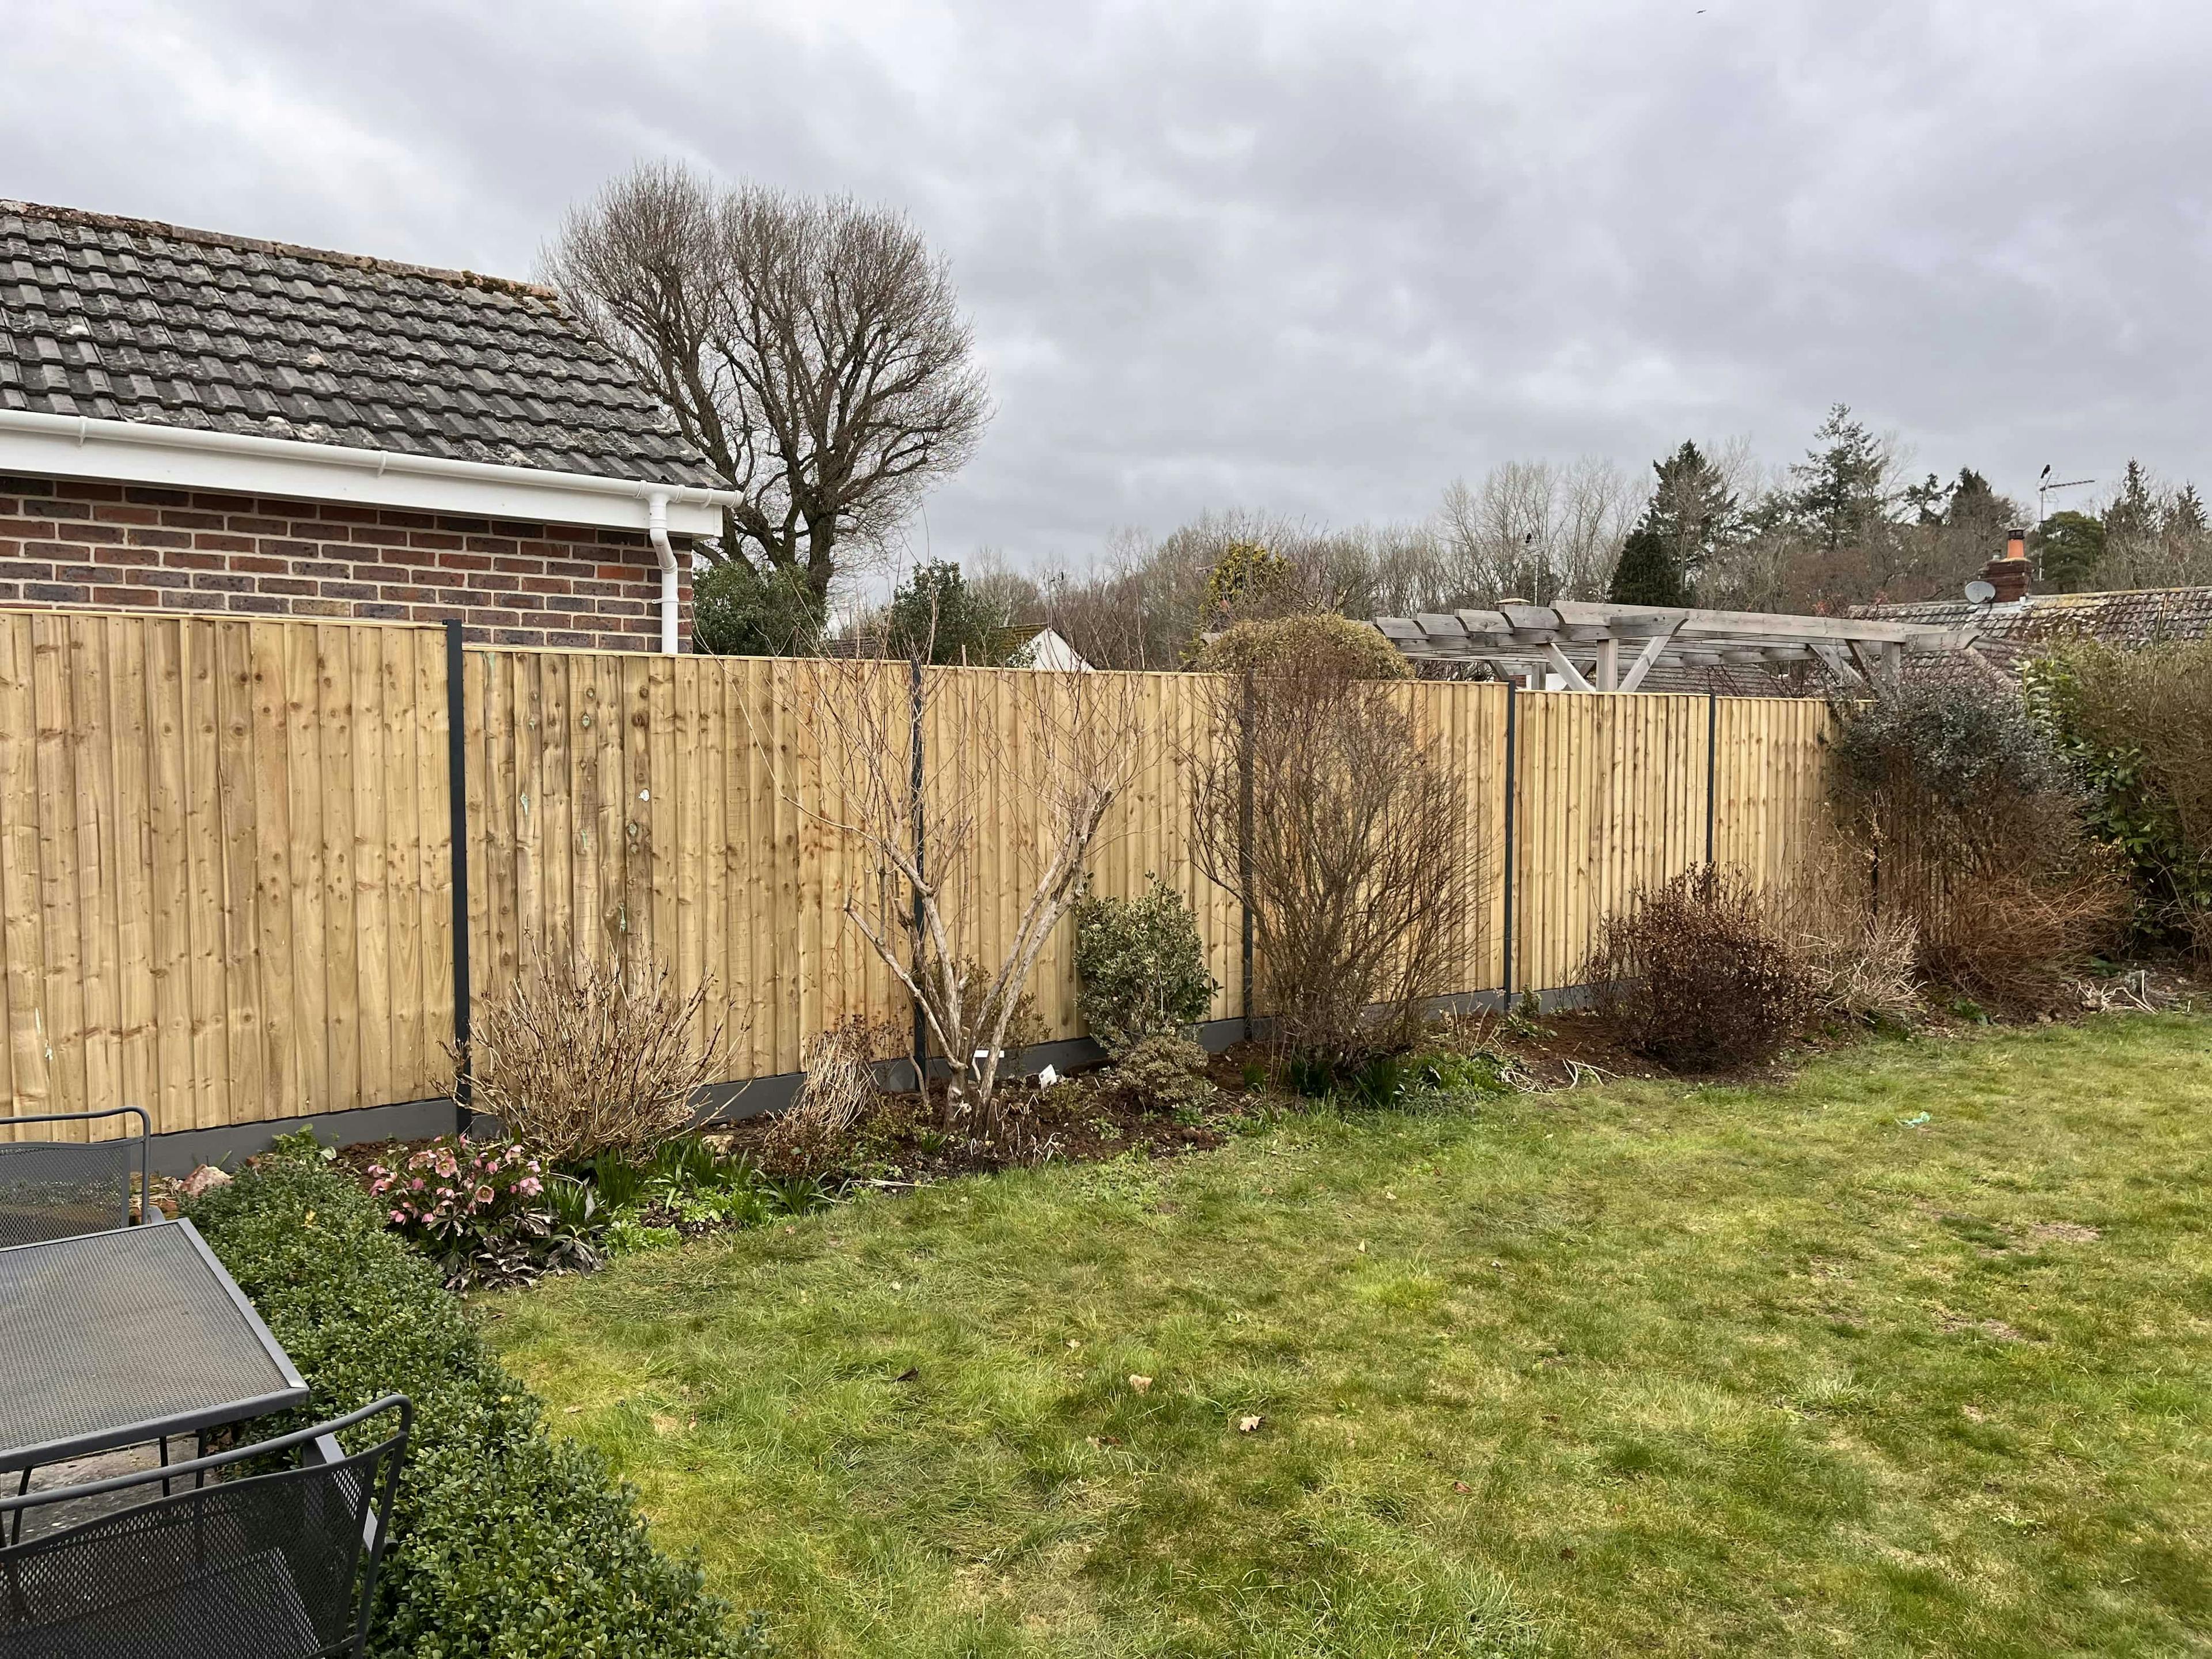 Modern, durable fencing solution without concrete recent work card